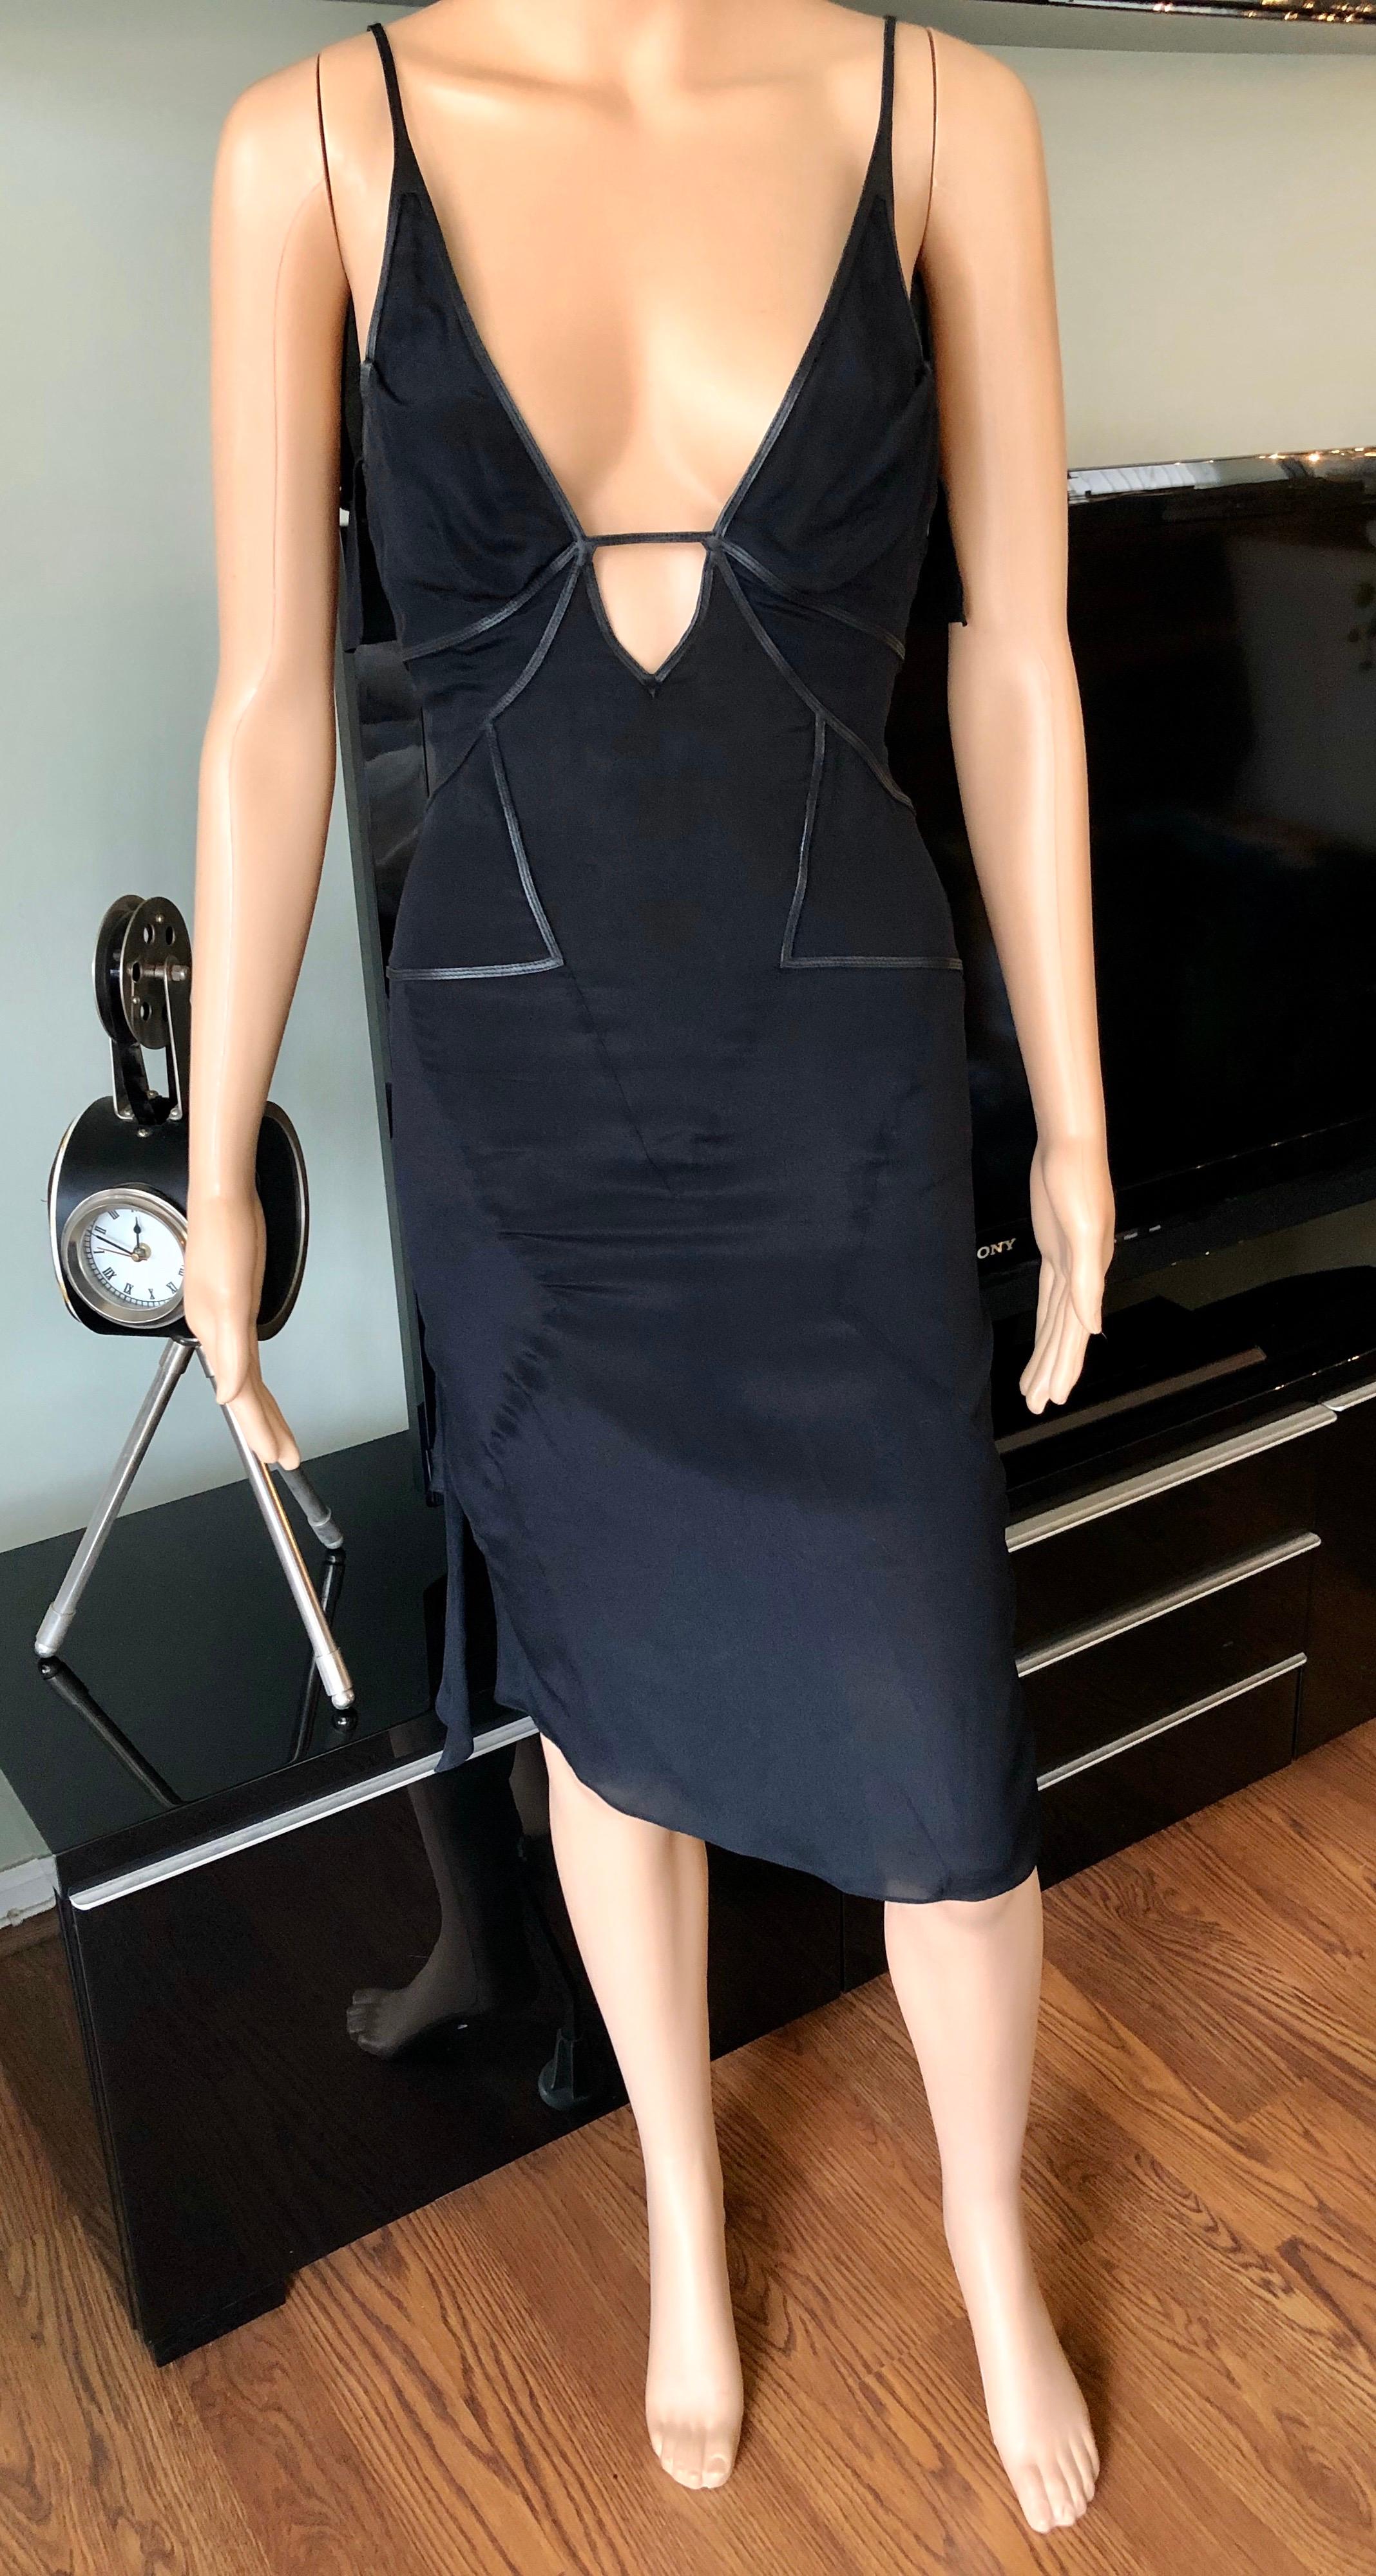 Women's Gucci by Tom Ford S/S 2004 Cutout Plunged Neckline Black Dress For Sale